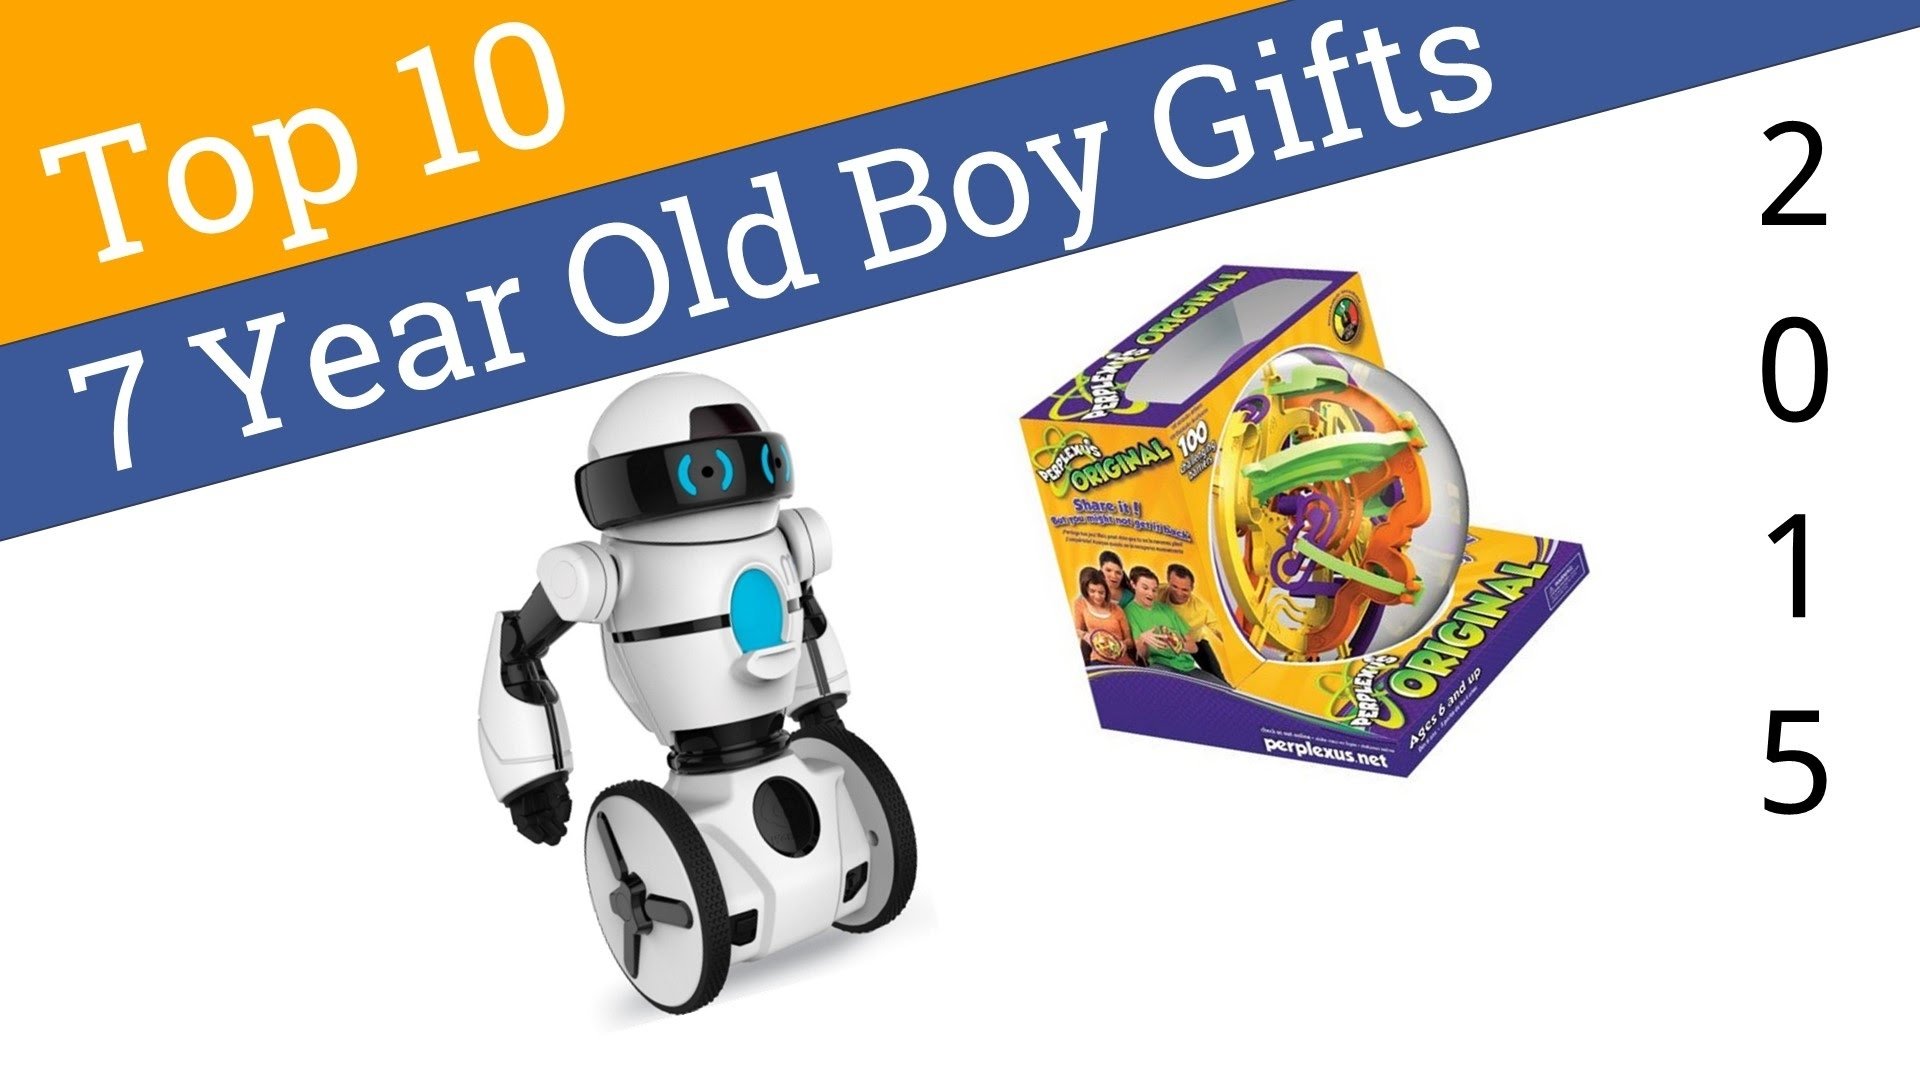 10 Lovely 7 Year Old Boy Gift Ideas 10 best 7 year old boy gifts 2015 youtube 6 2022